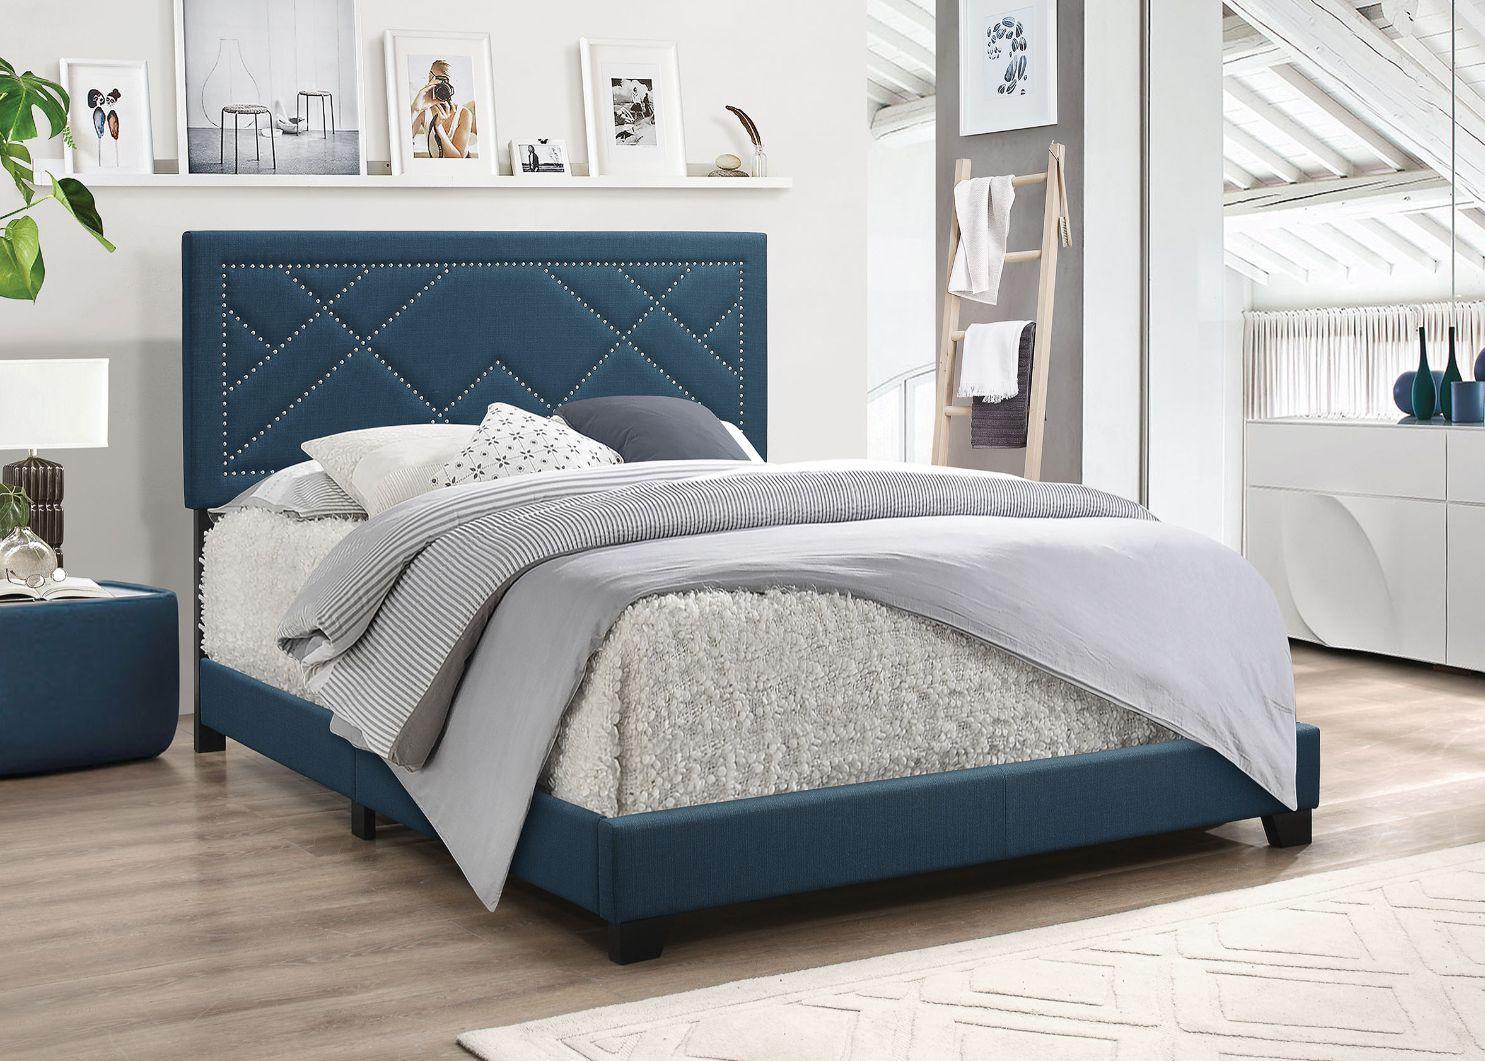 

    
Transitional Dark Teal Queen Bed by Acme Ishiko 20860Q
